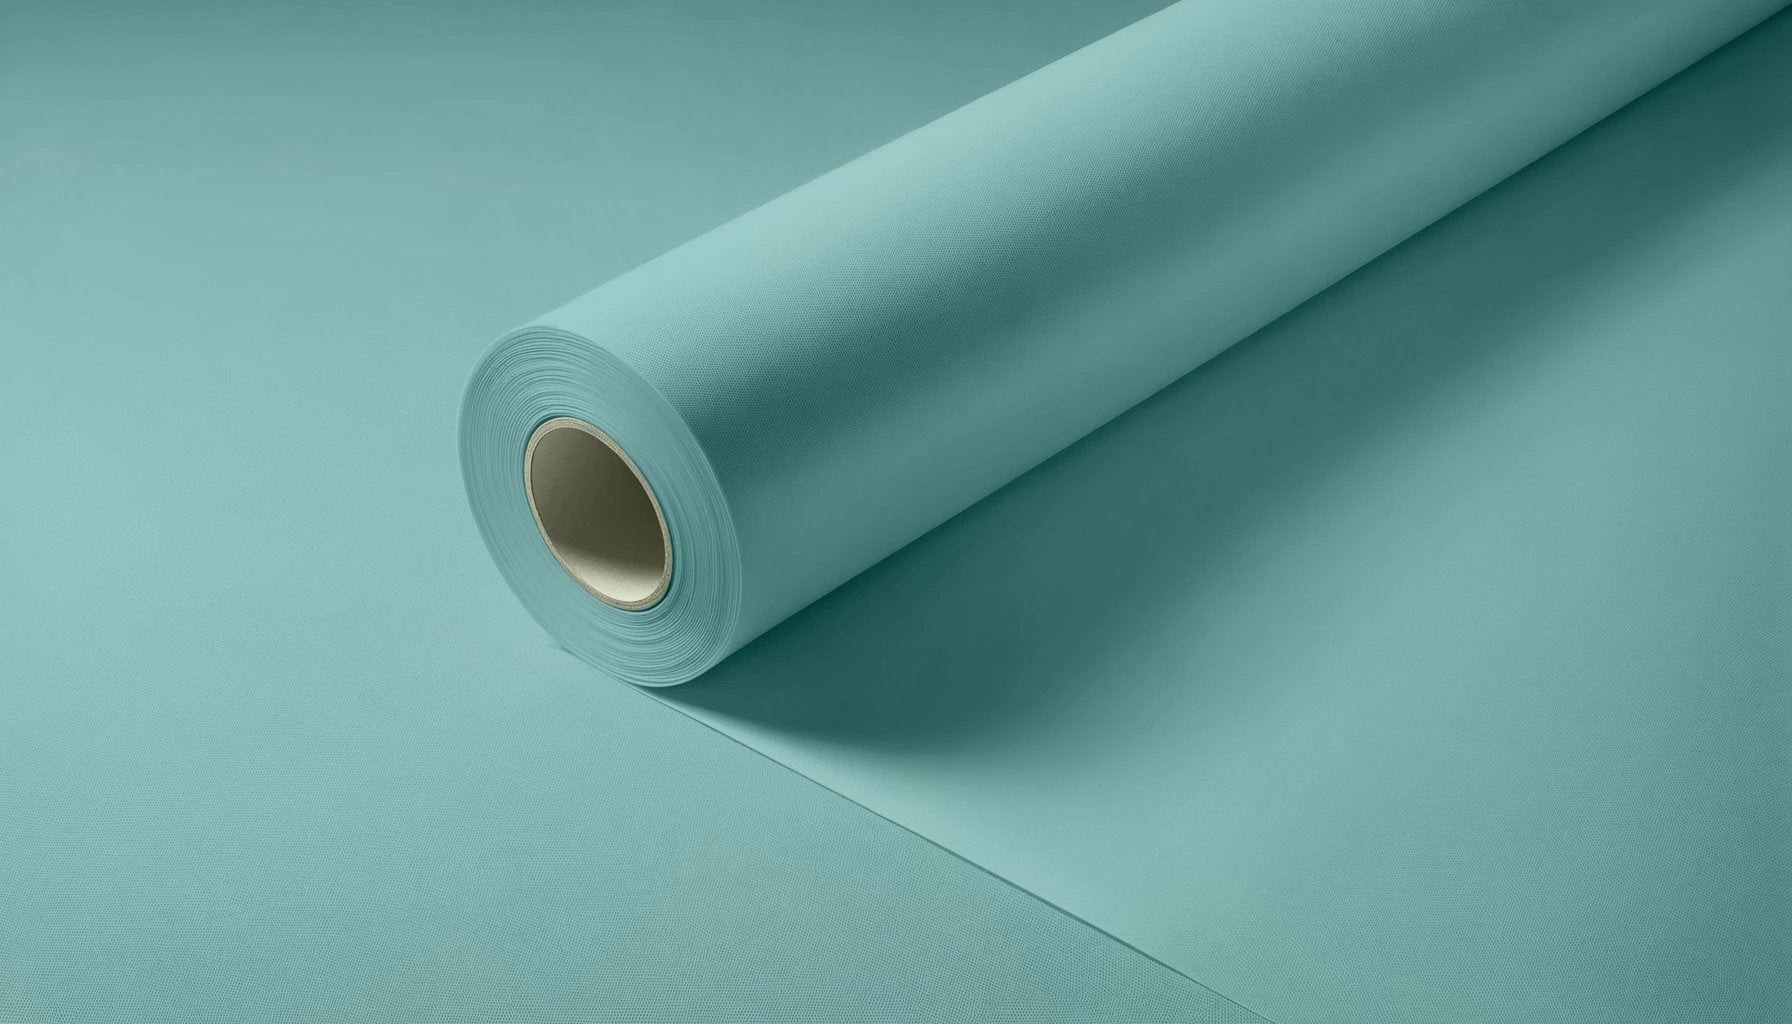 Peel & Stick Removable Re-usable Paint - Color RAL 6034 Pastel Turquoise - offRAL™ - RALRAW LLC, USA